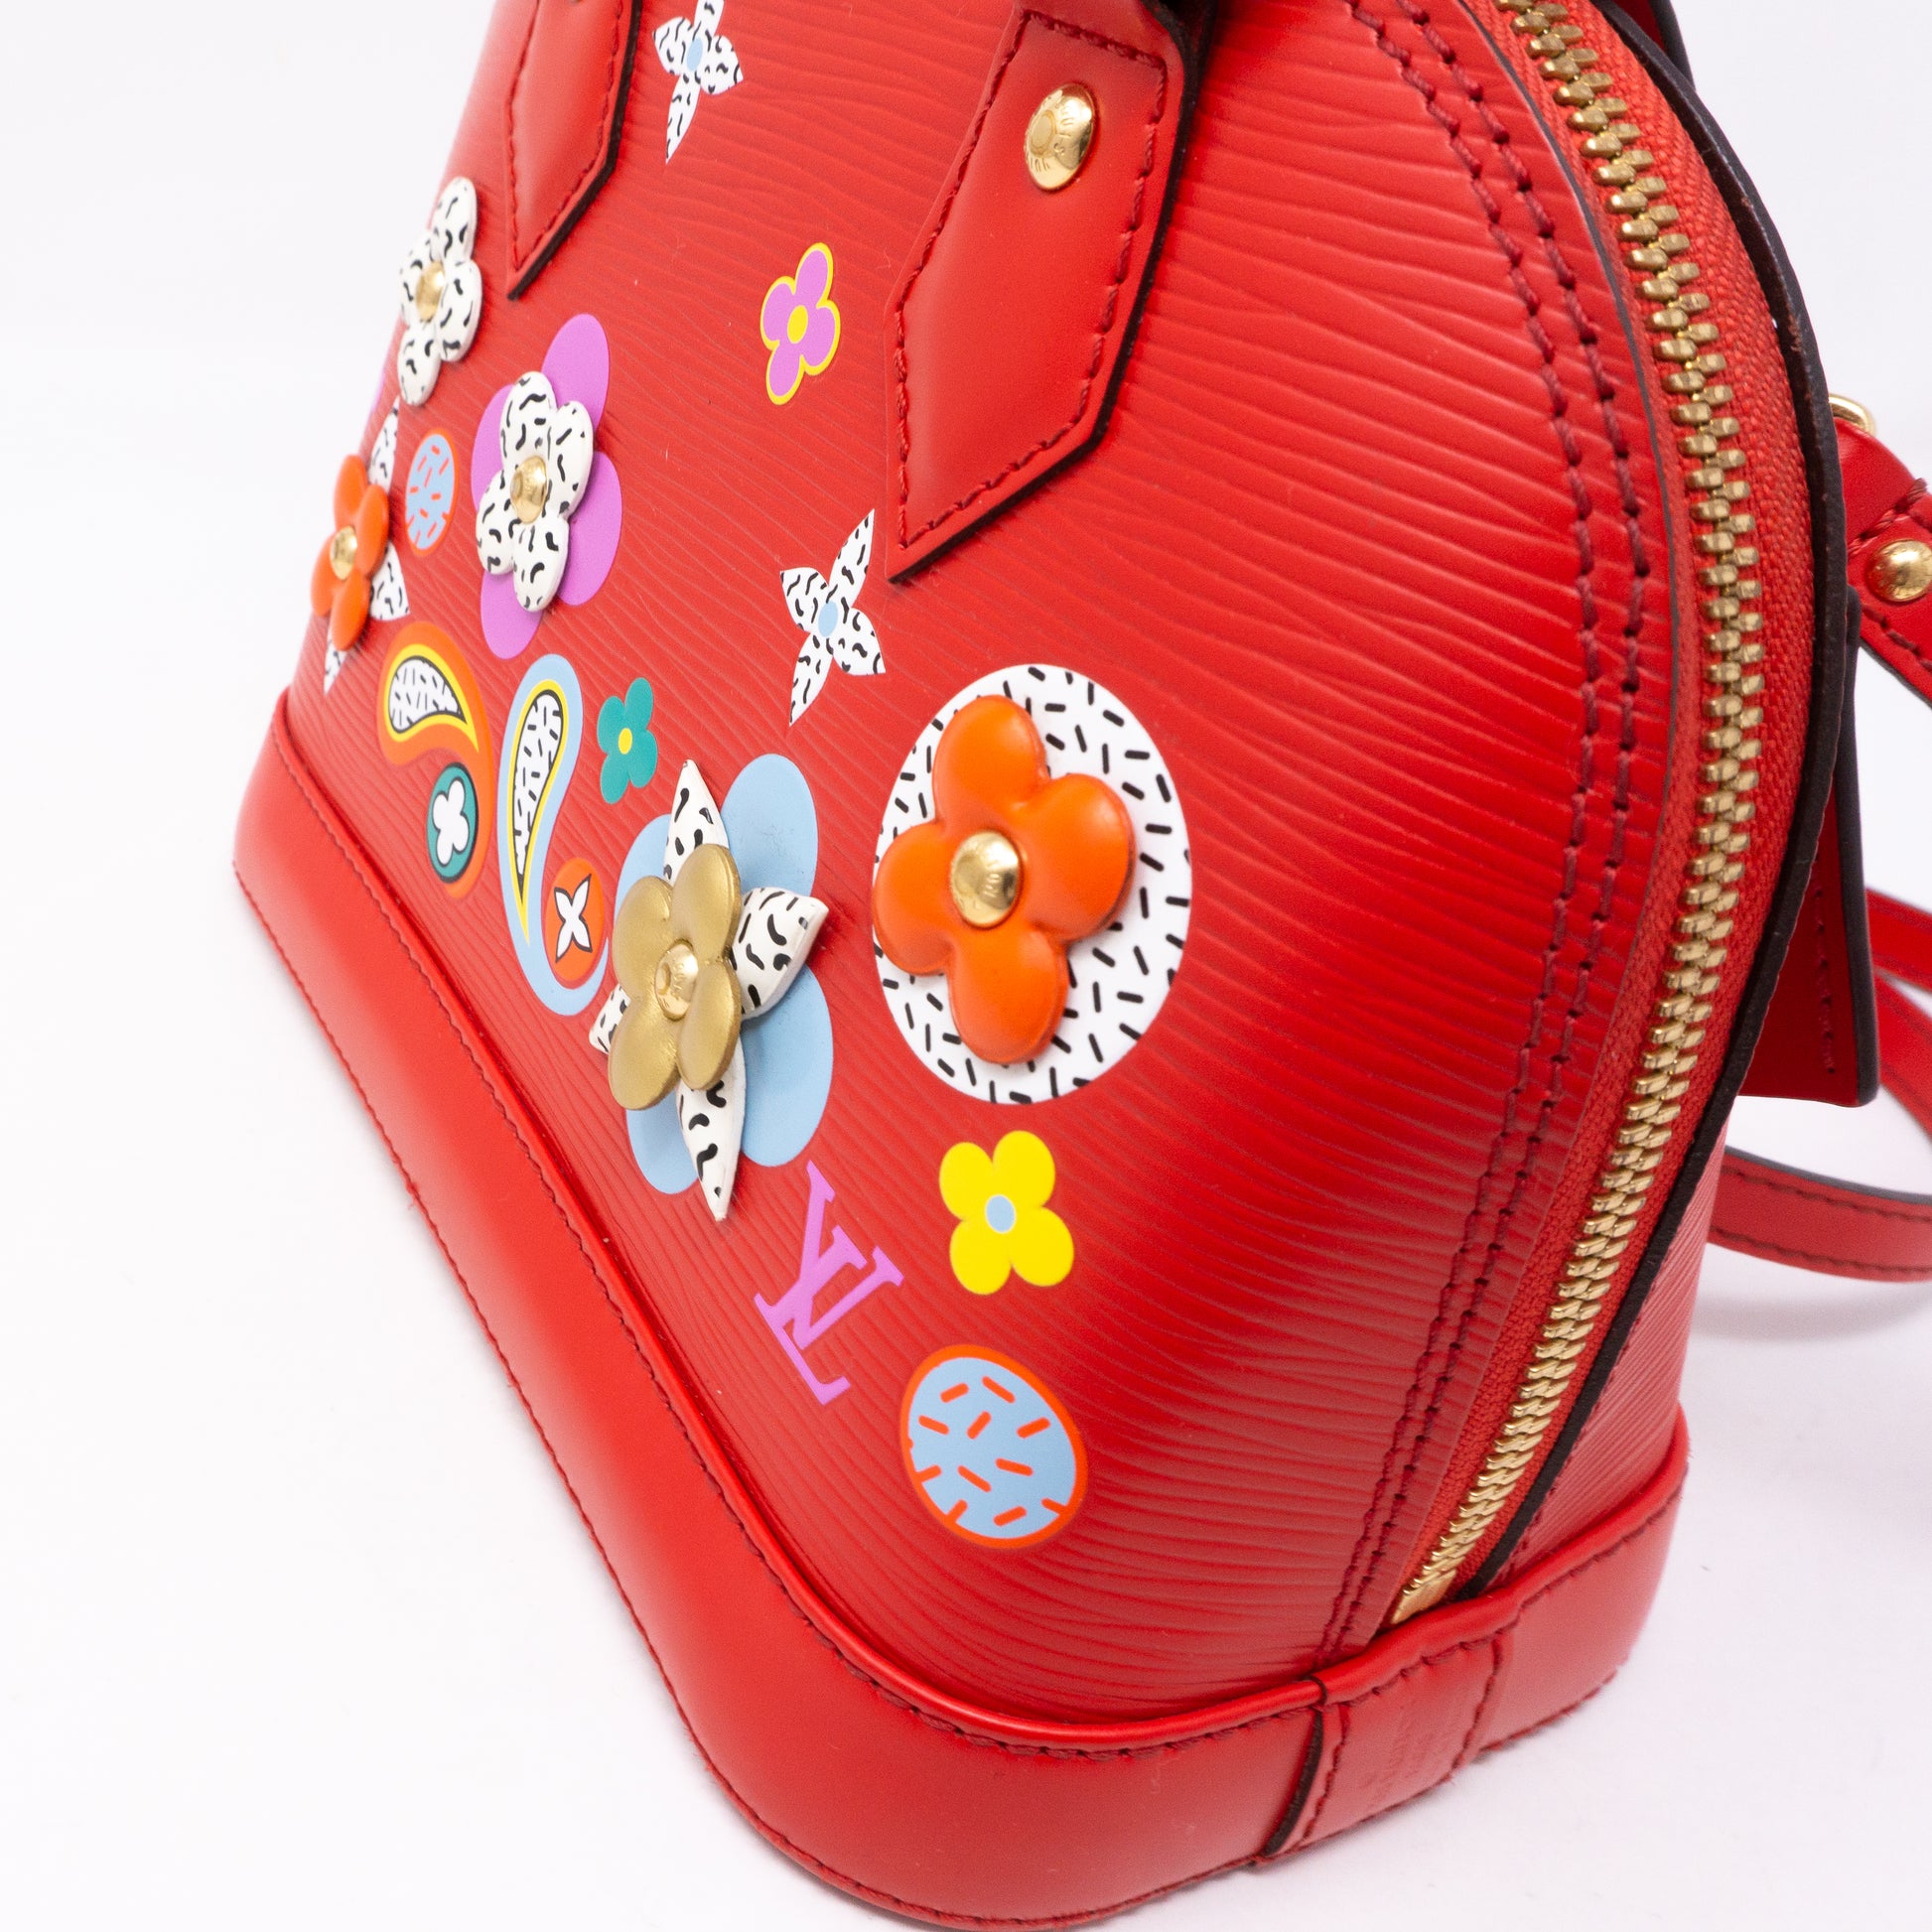 Alma BB Edition Blooming Flowers bag in red epi leather